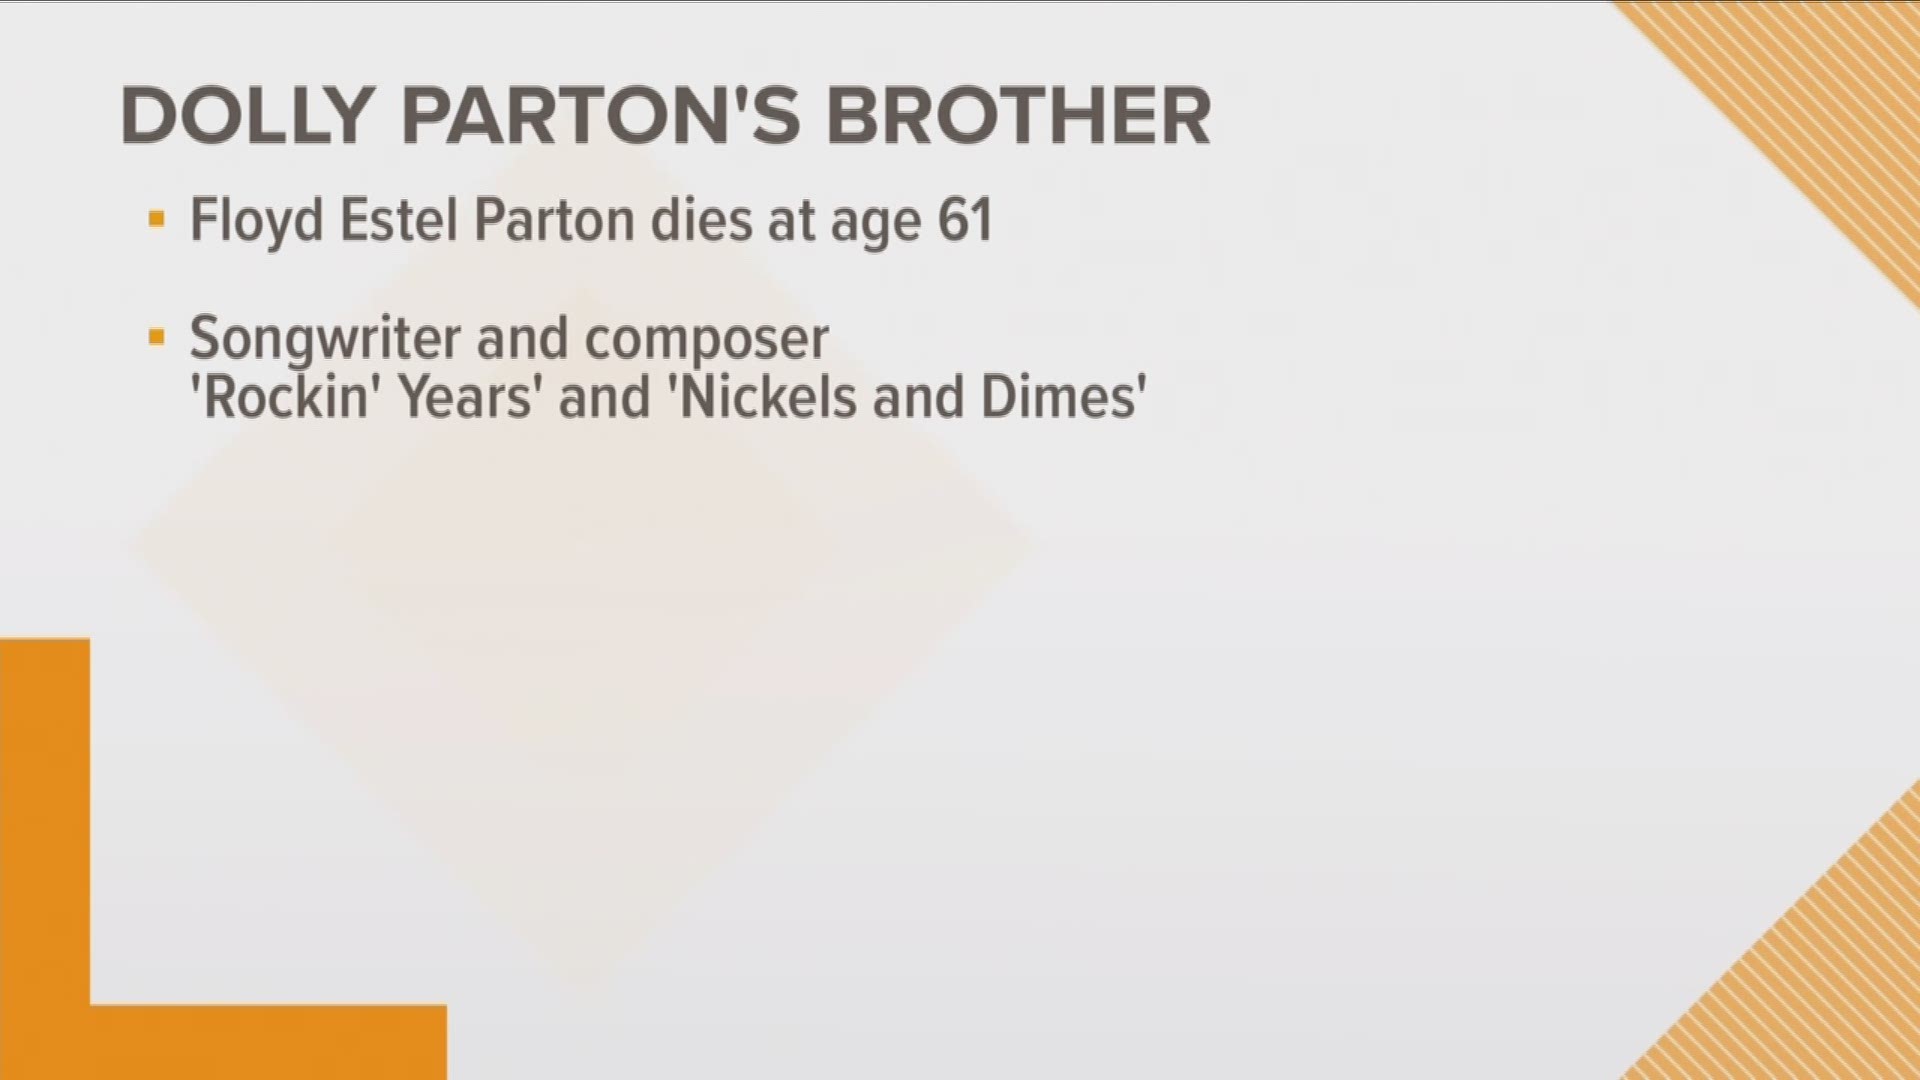 Floyd Estel Parton died on December 6th. He was 61 years old.